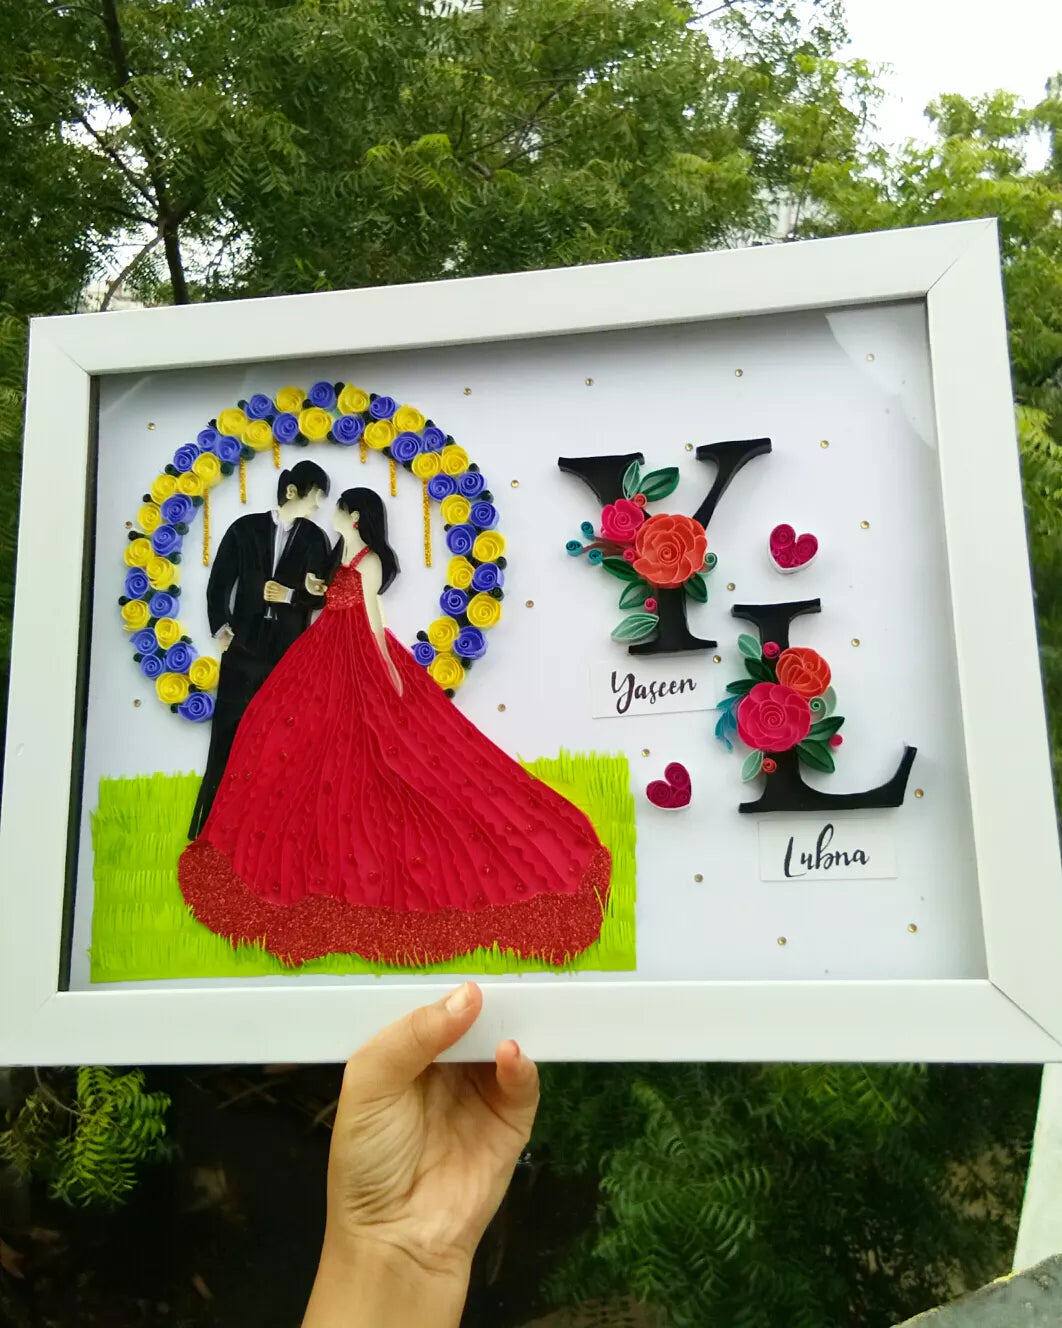 Whispers of Love: Quilled Sentiments in Every Coil